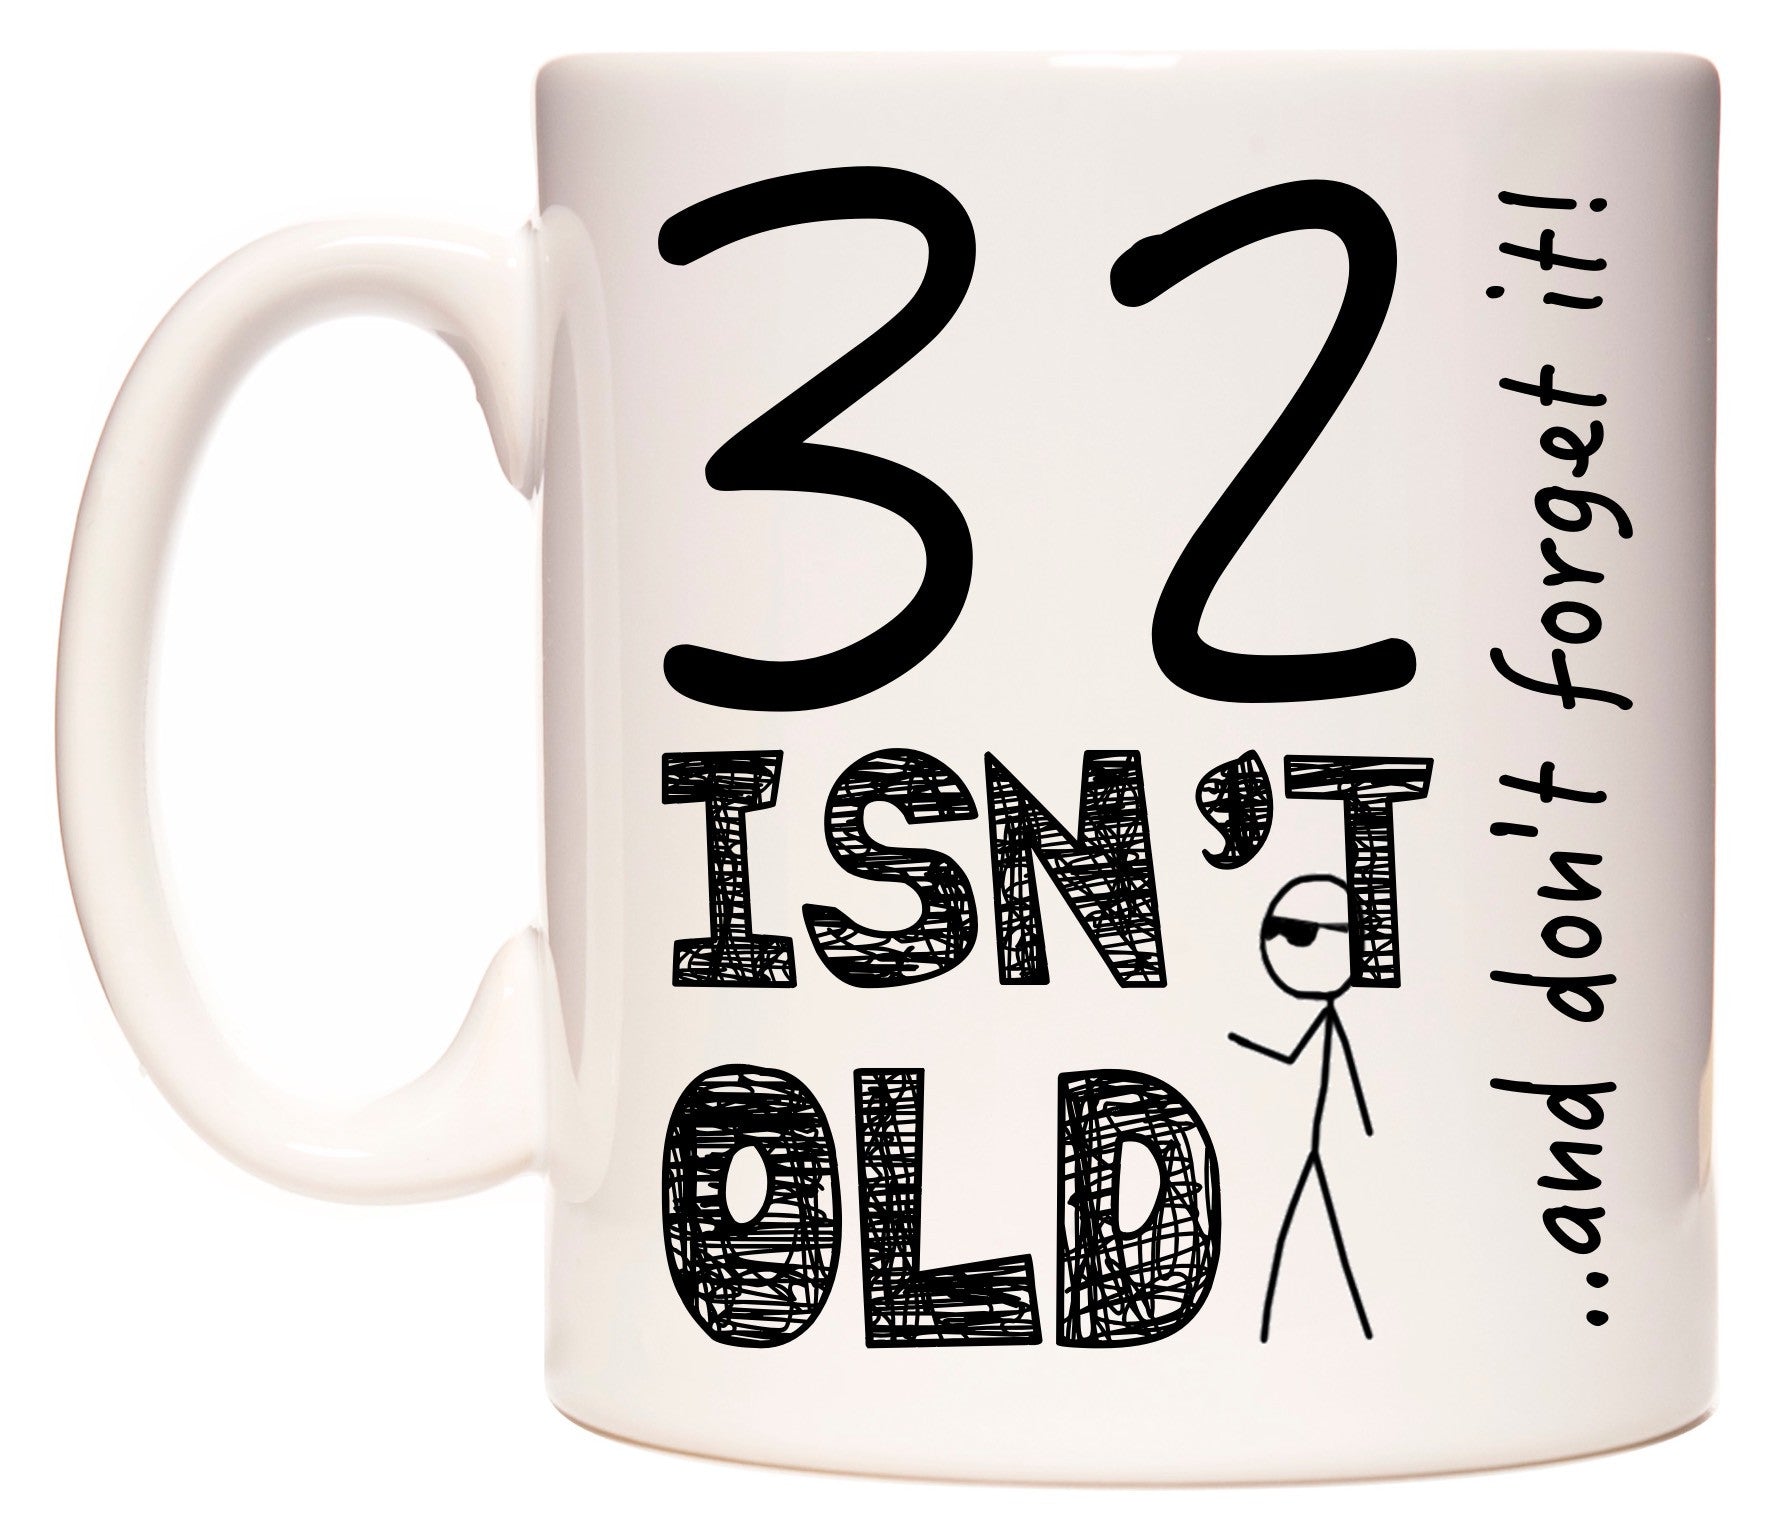 This mug features 32 Isn't Old